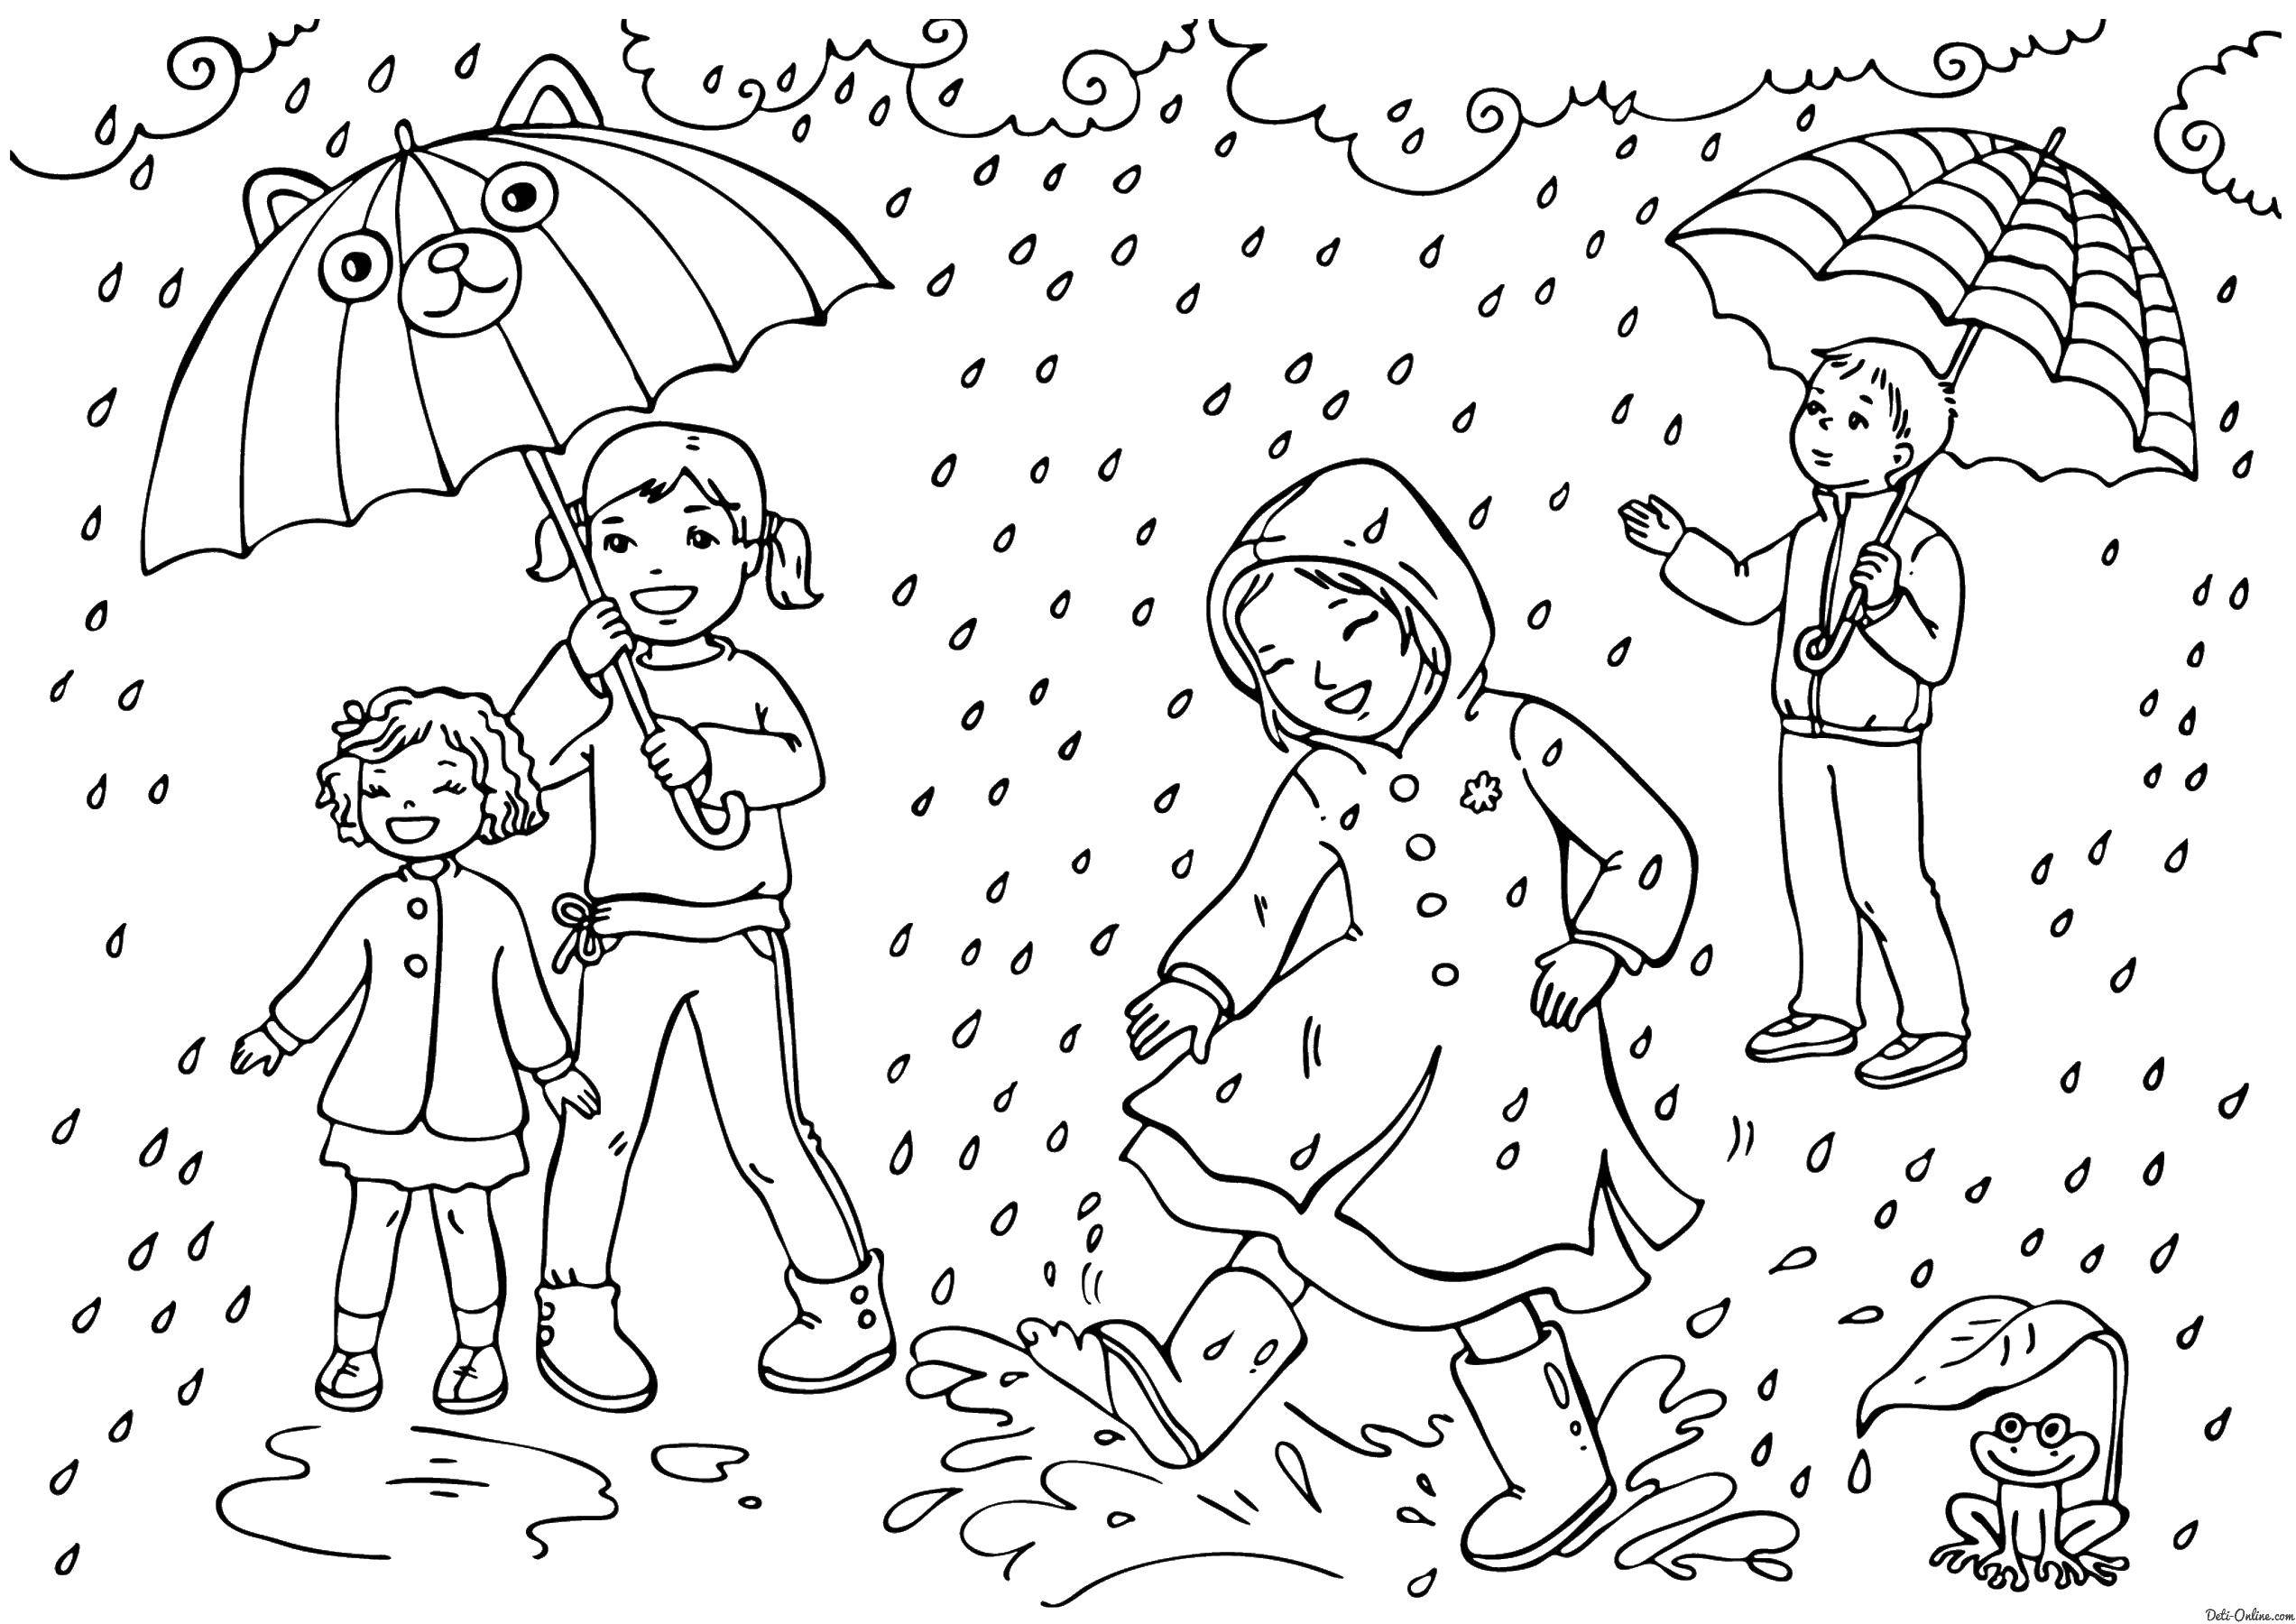 Coloring Children playing in the rain. Category autumn. Tags:  rain, umbrella.